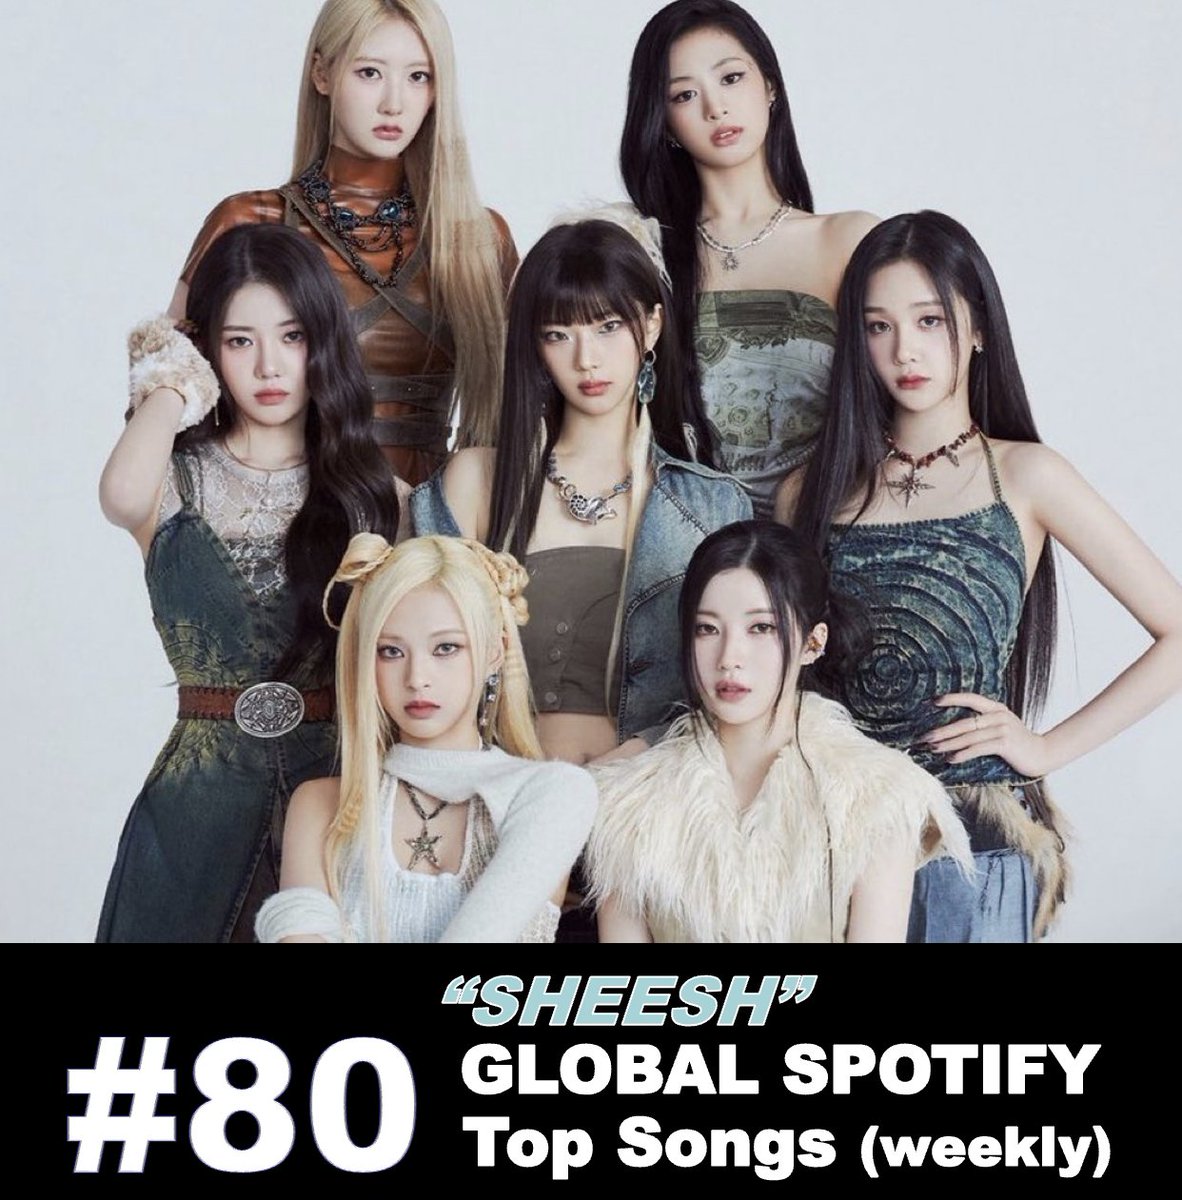 #BABYMONSTER's #SHEESH debuts at #80 on the Global Spotify Weekly Chart with 11,651,235 filtered streams! 💪🆕💥8⃣0⃣🌎🎧📆📈👑👑👑👑👑👑👑❤️‍🔥 #베이비몬스터 @YGBABYMONSTER_